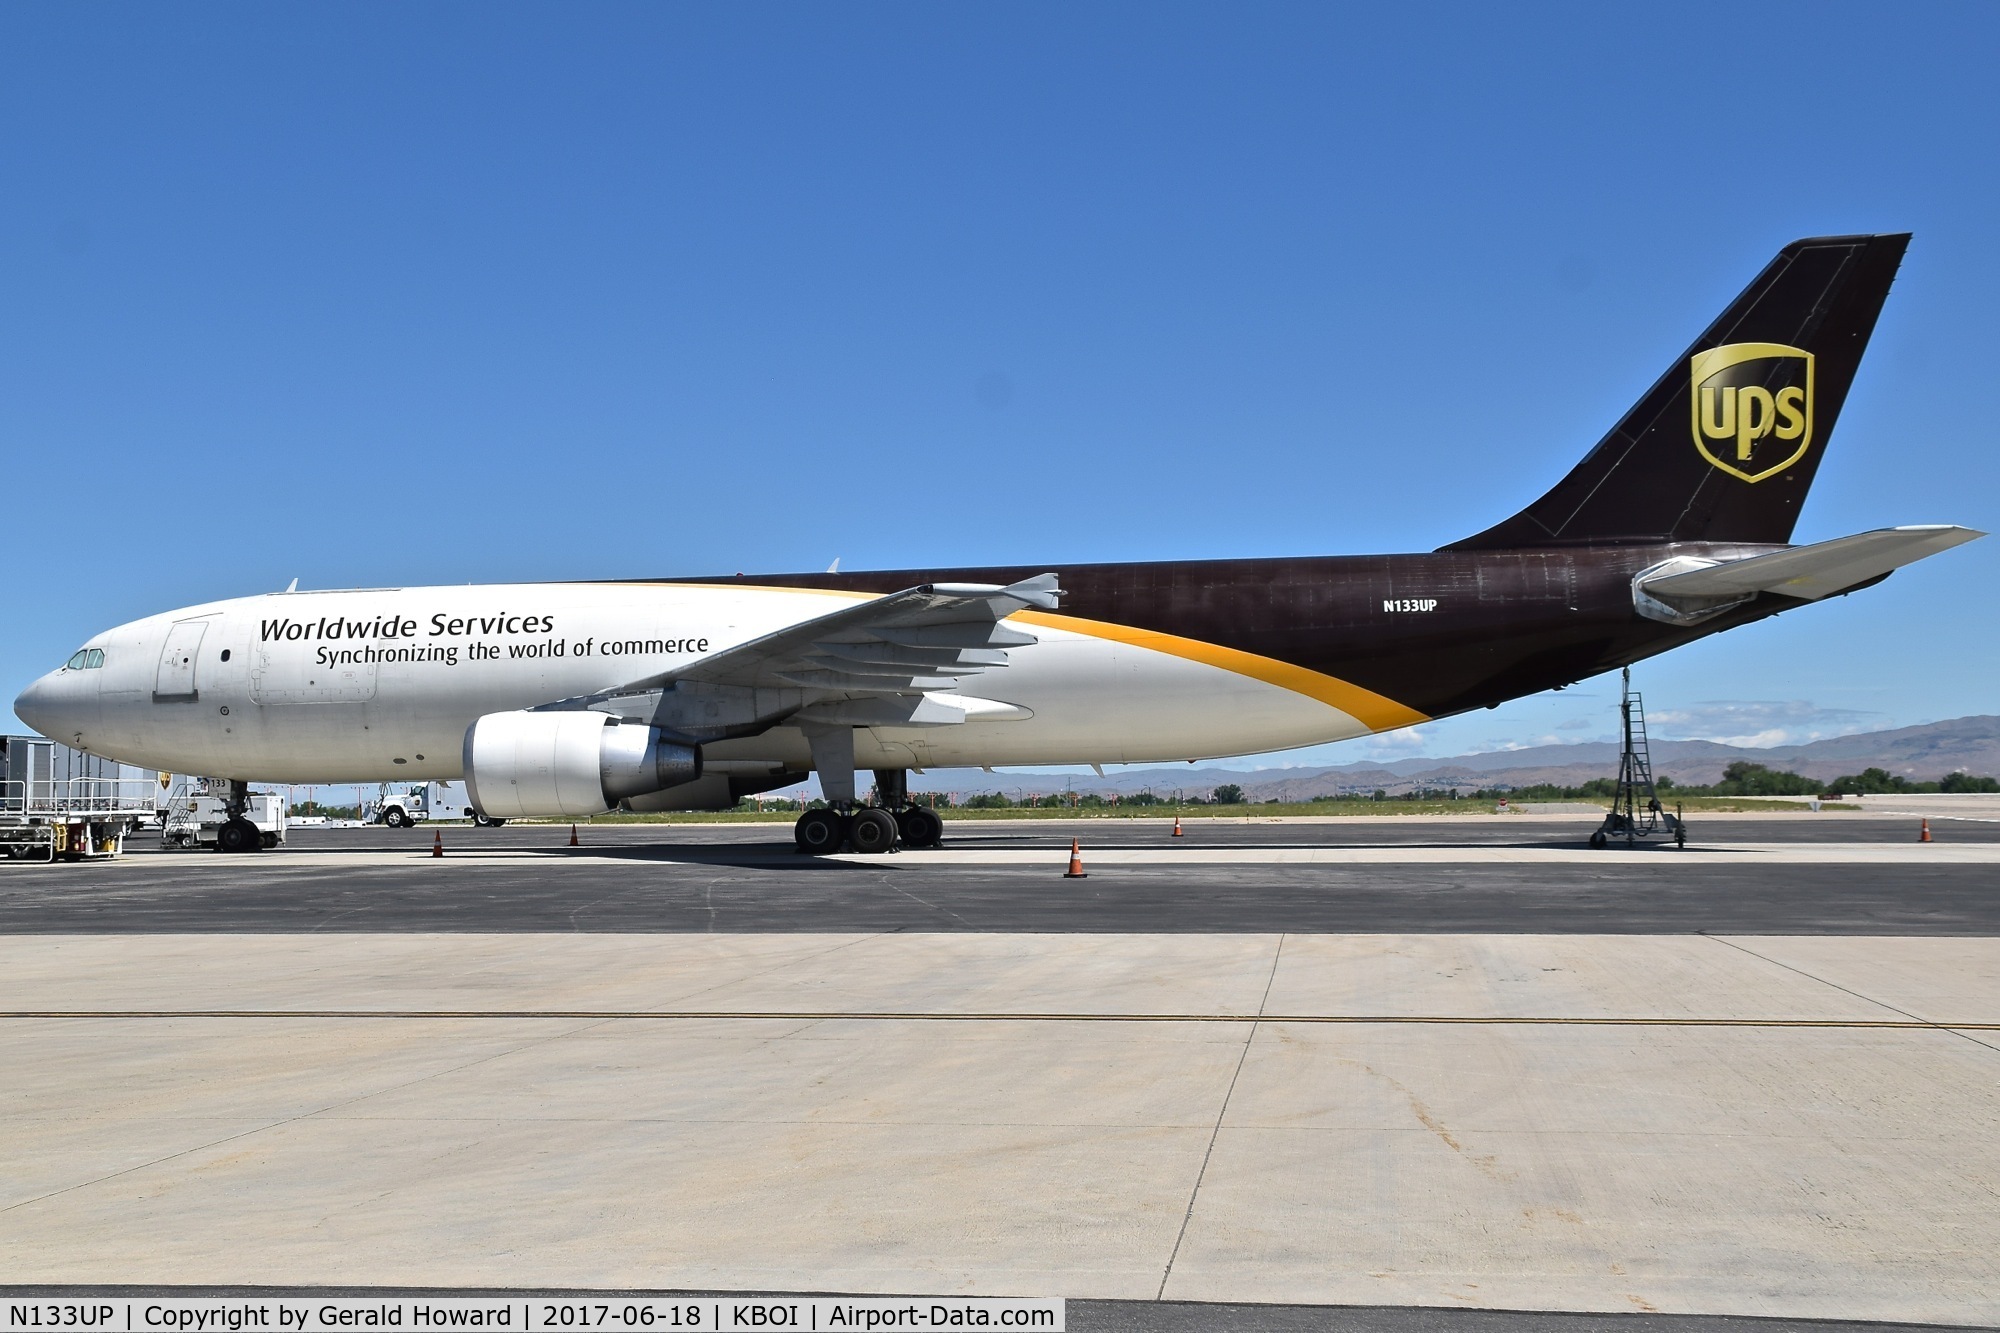 N133UP, 2001 Airbus A300F4-622R C/N 816, Parked on the UPS ramp.